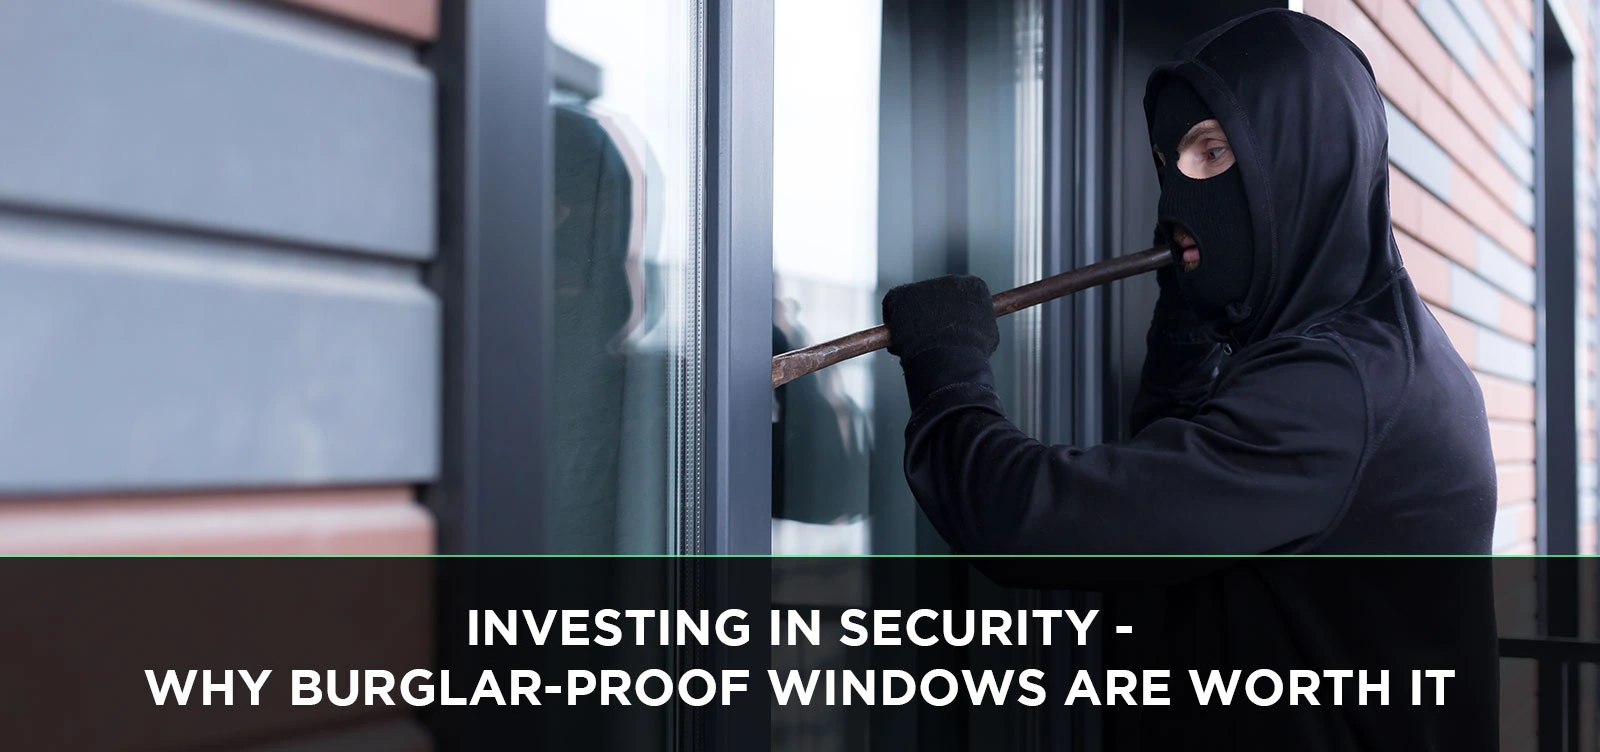 Investing in Security: Why Burglar-Proof Windows Are Worth It